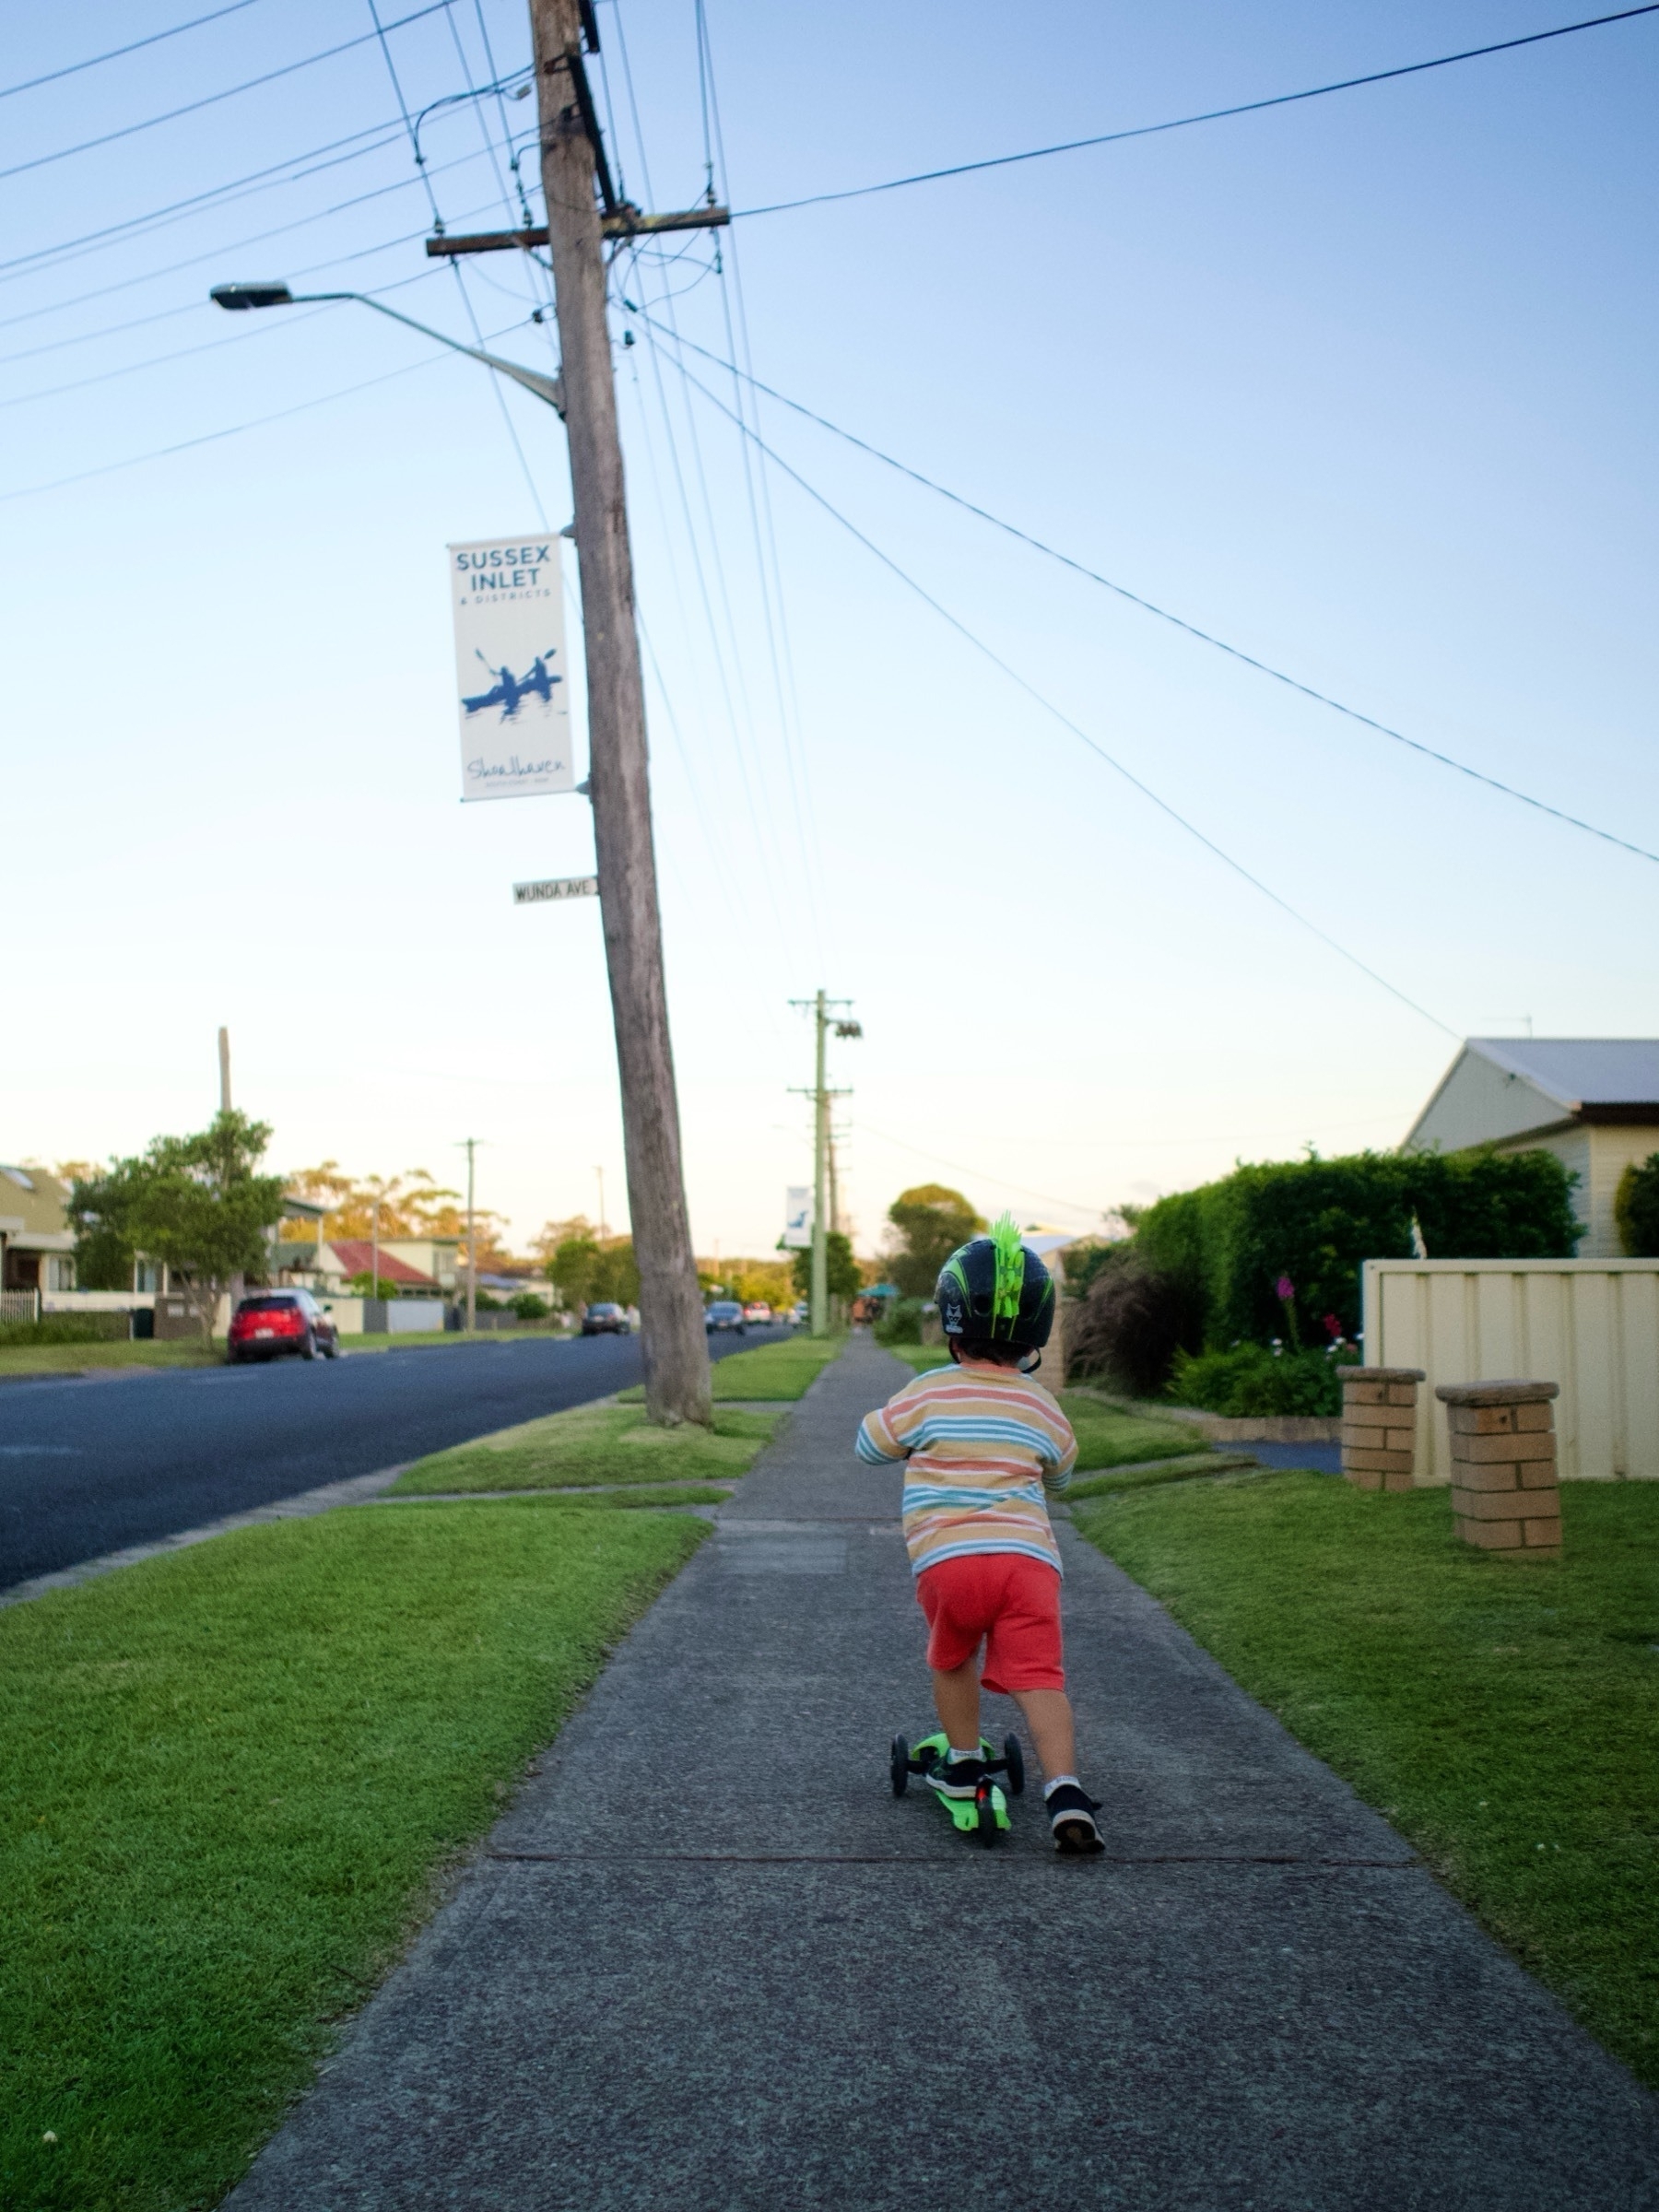 A toddler riding a scooter on a footpath